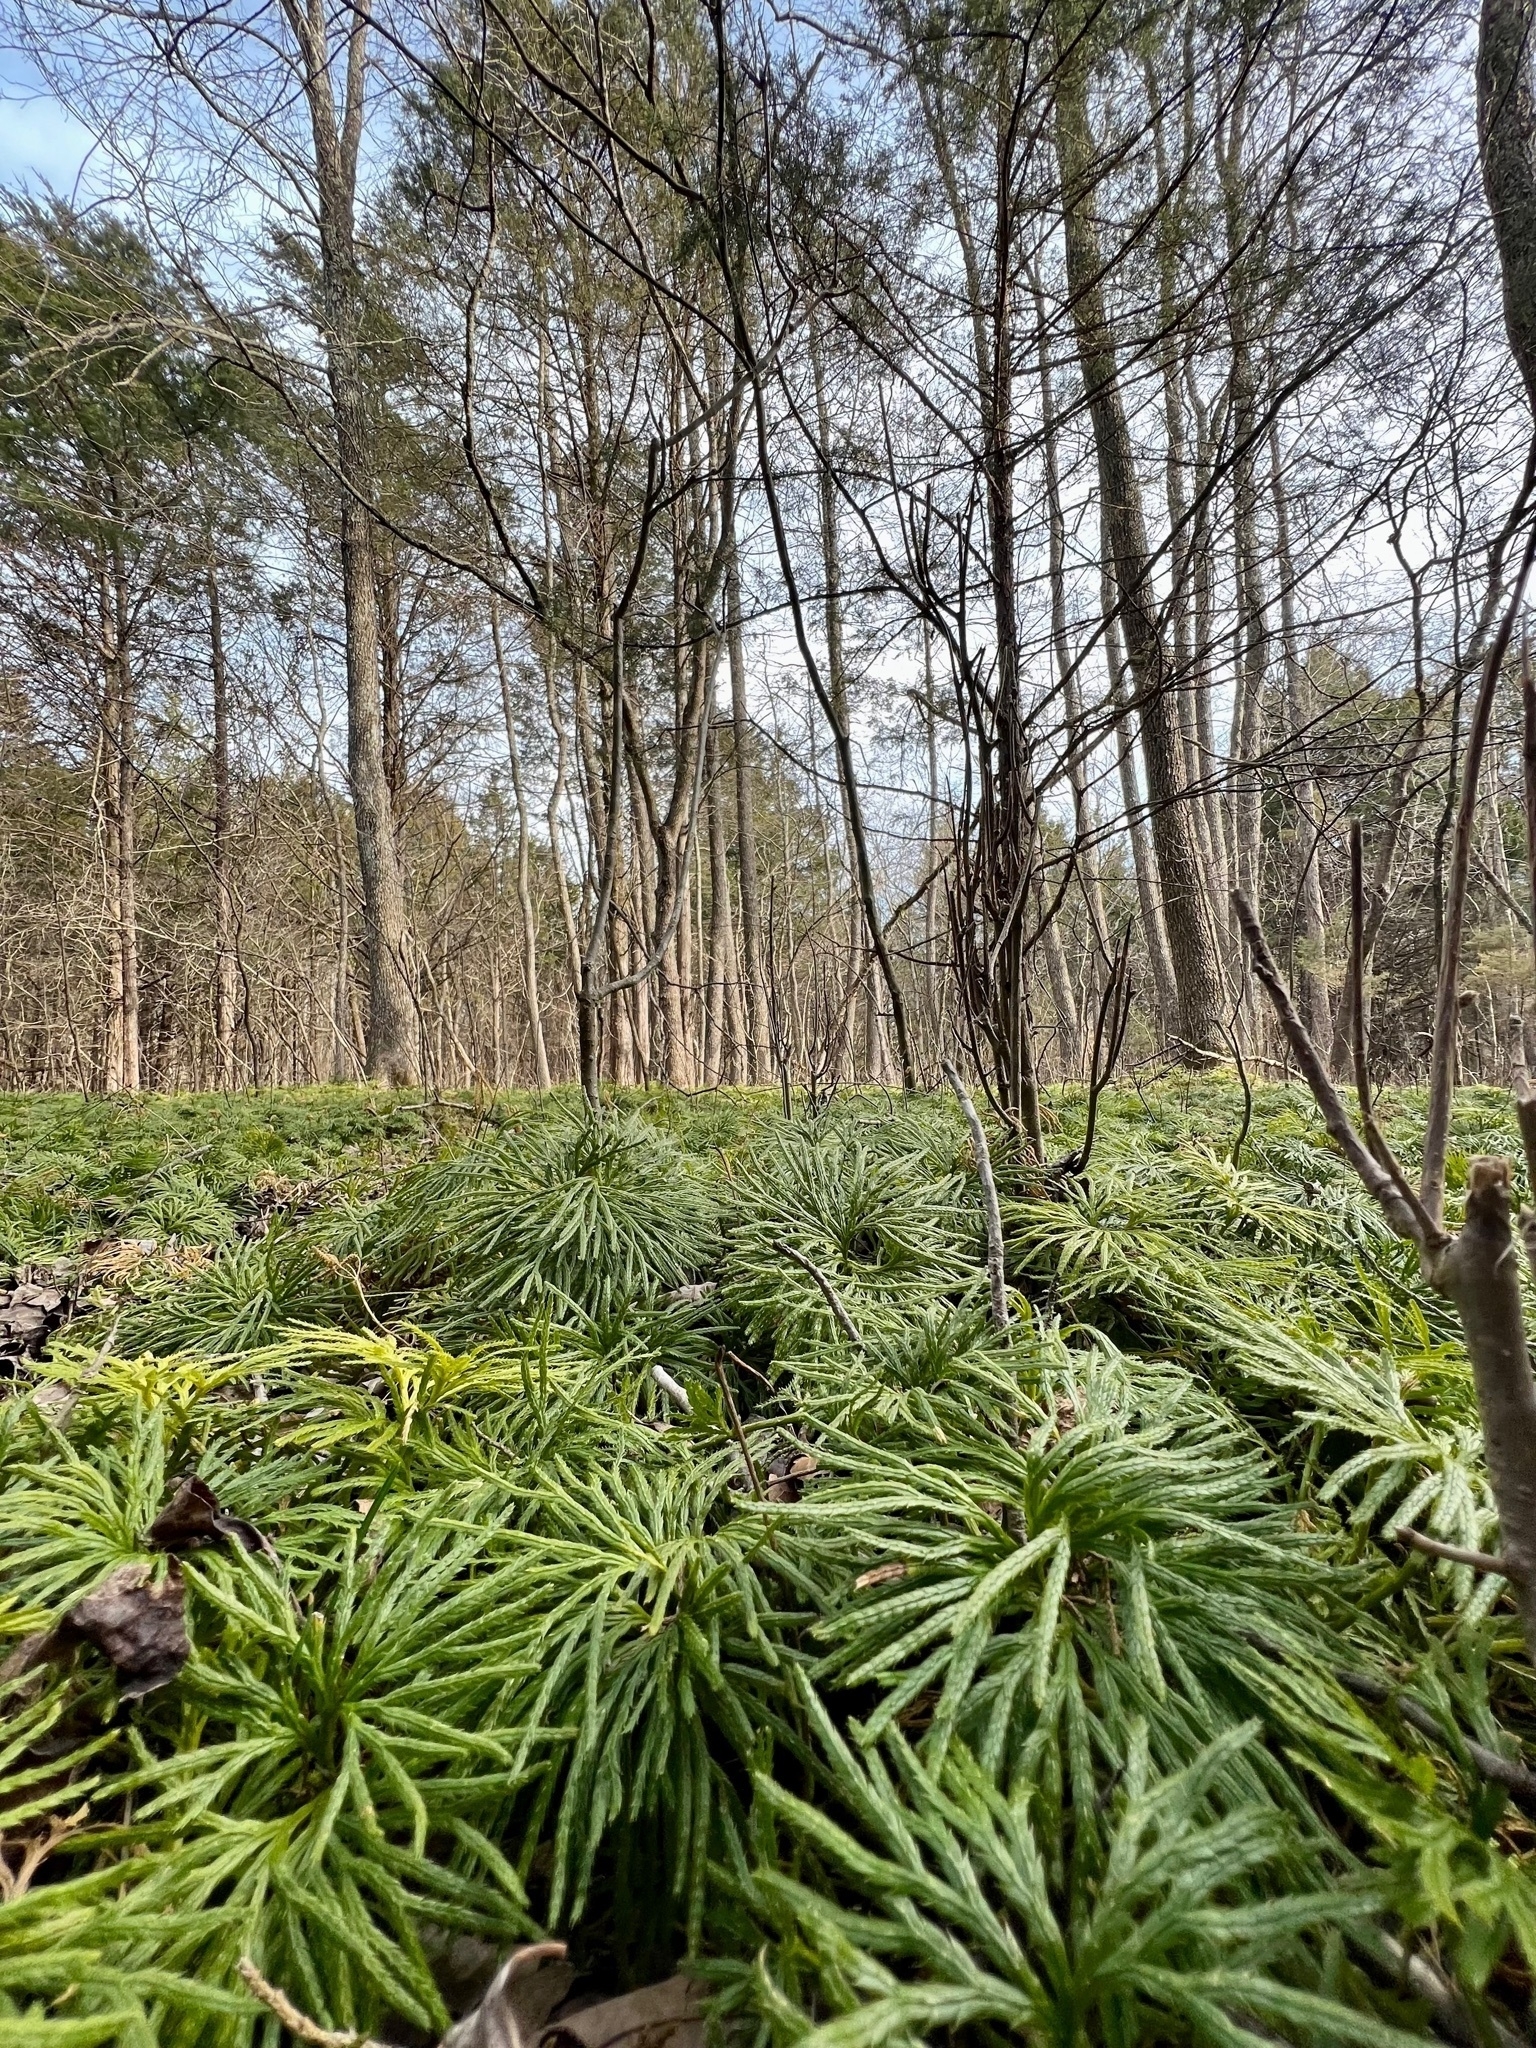 An evergreen, ground cover resembling cedar branches covers the winter forest floor. Bare winter trees are in background.